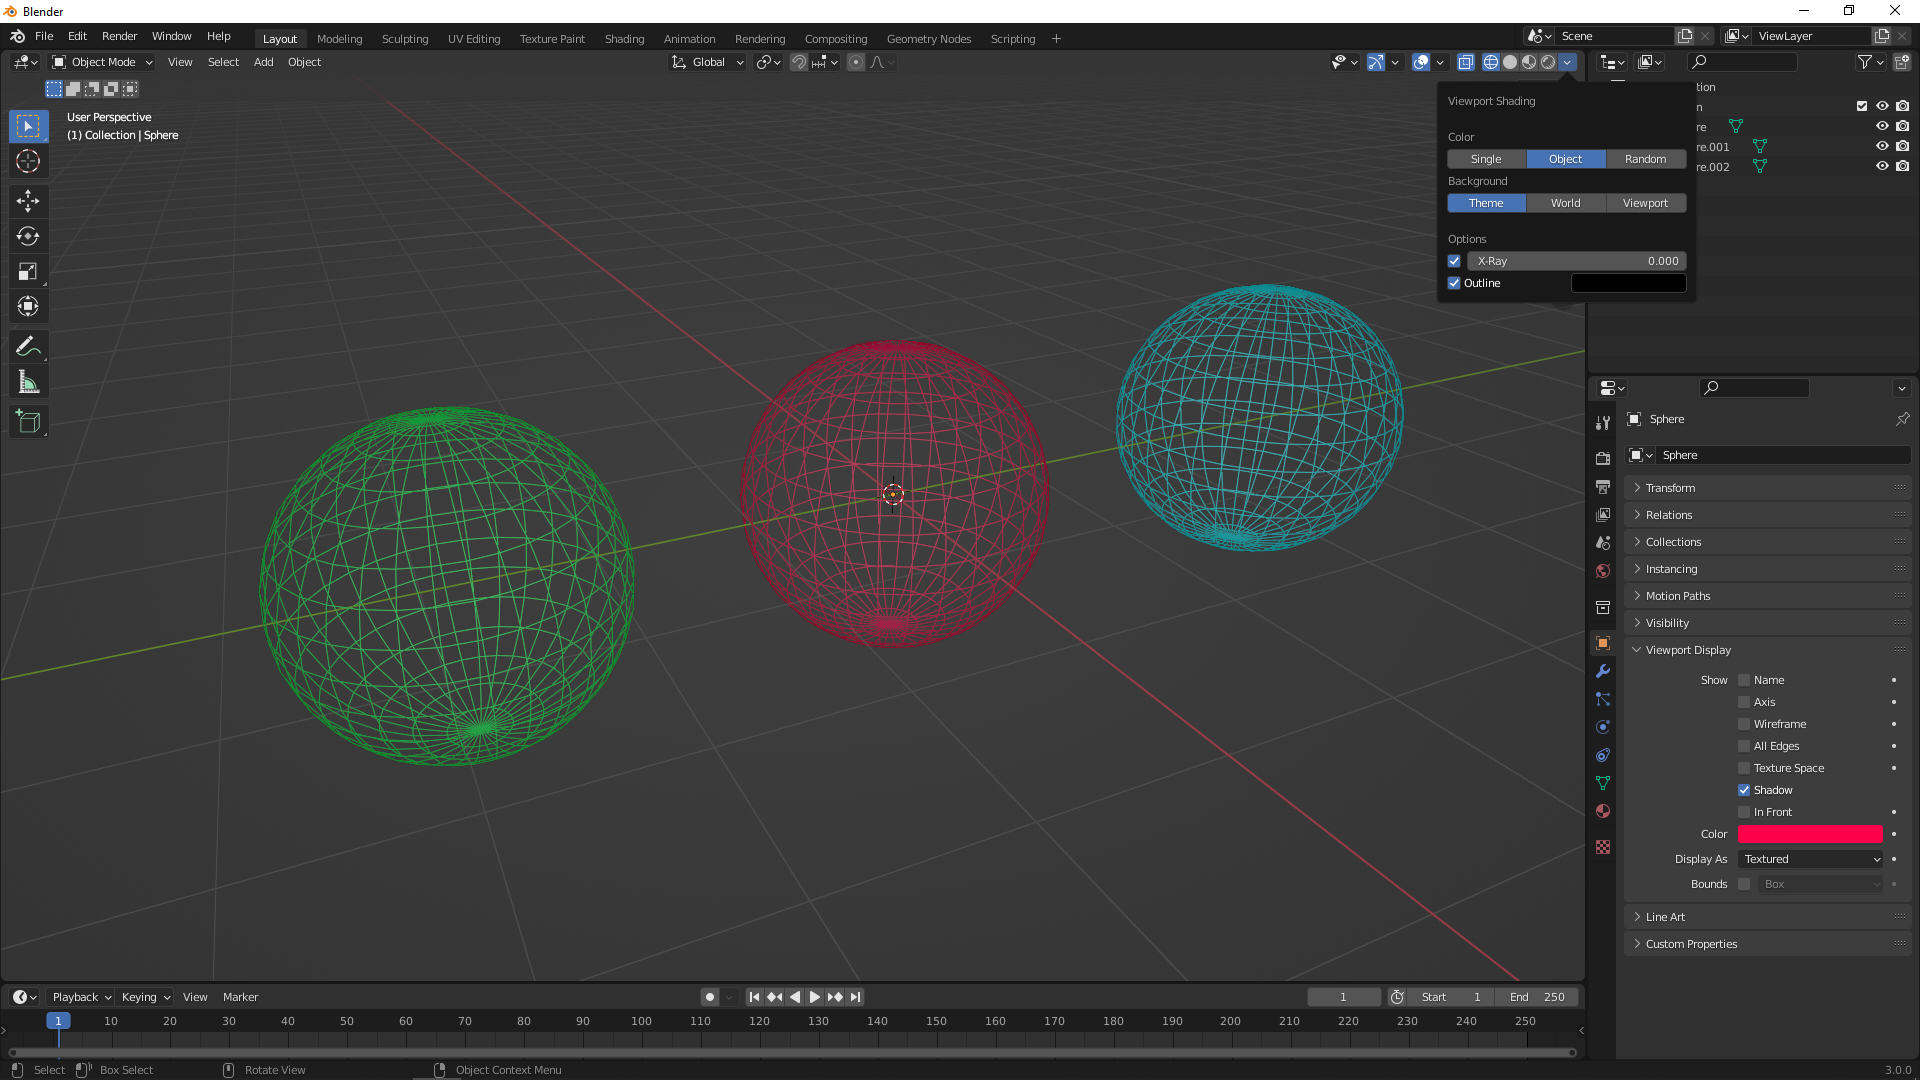 How to change wireframe color for 3D objects in Blender